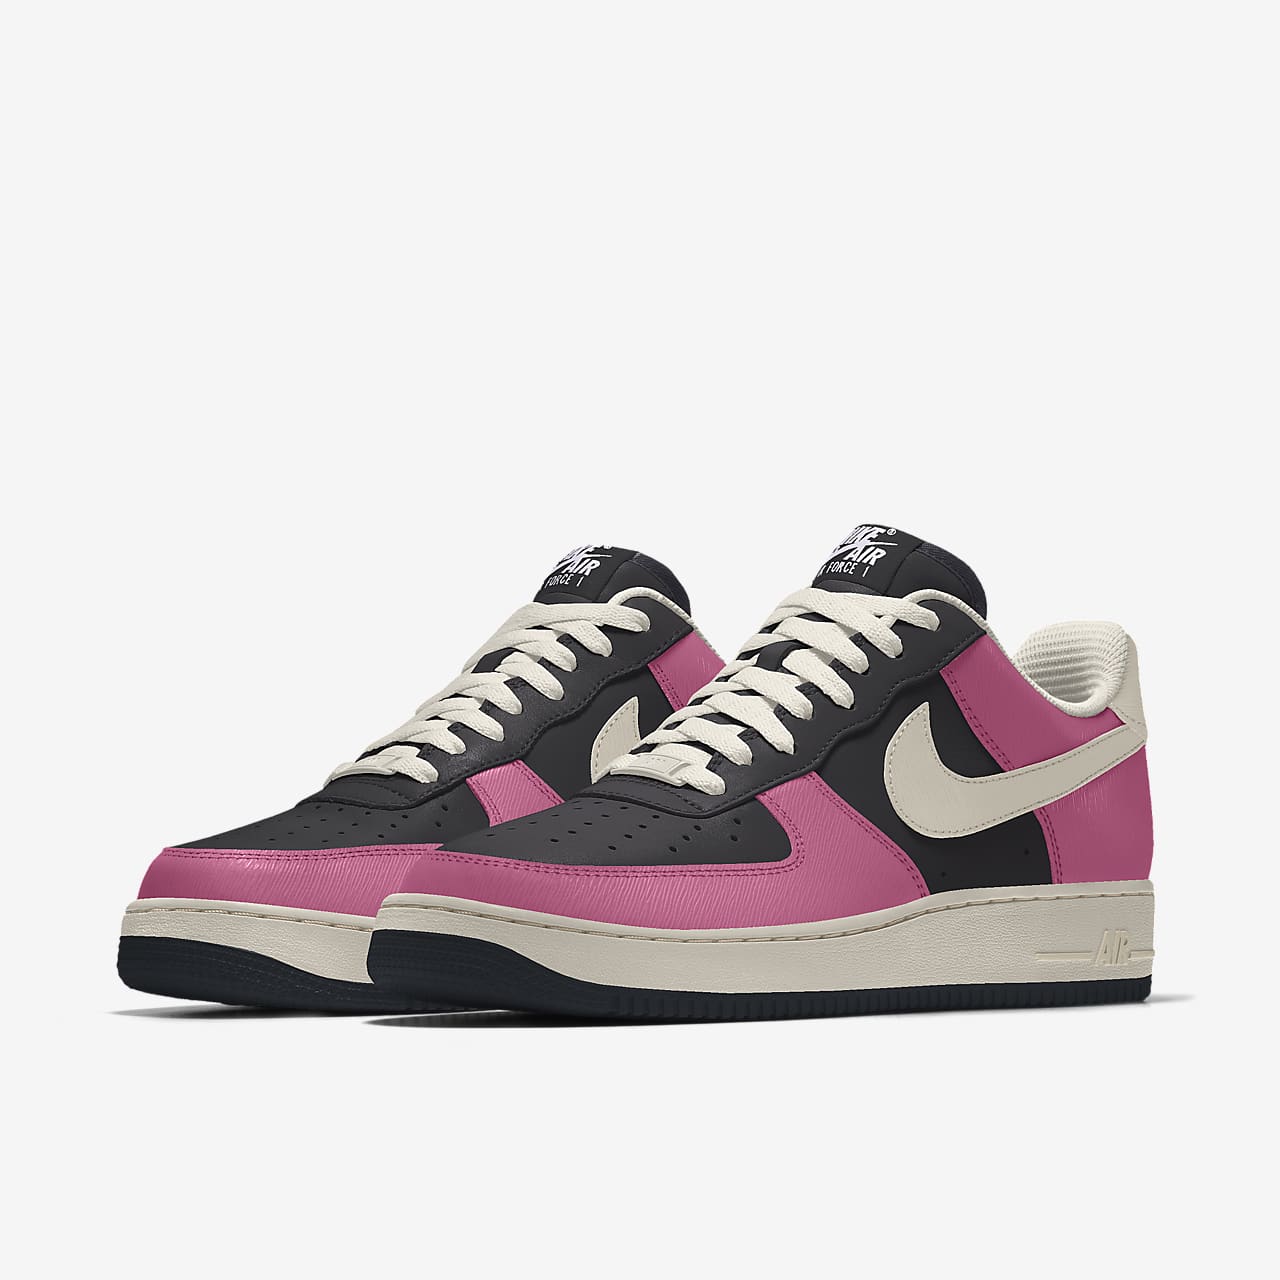 Air 1 By You Women's Shoe. Nike AT